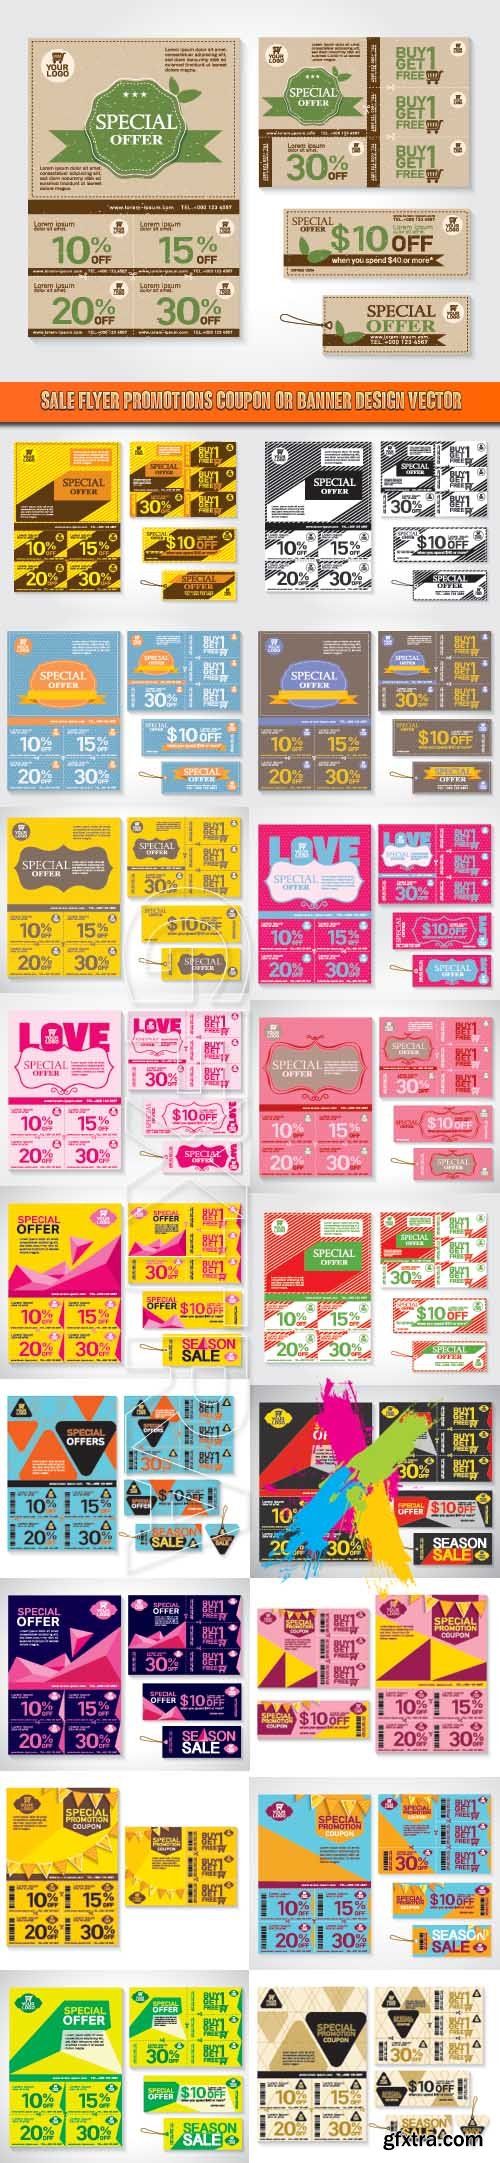 Sale flyer promotions coupon or banner design vector